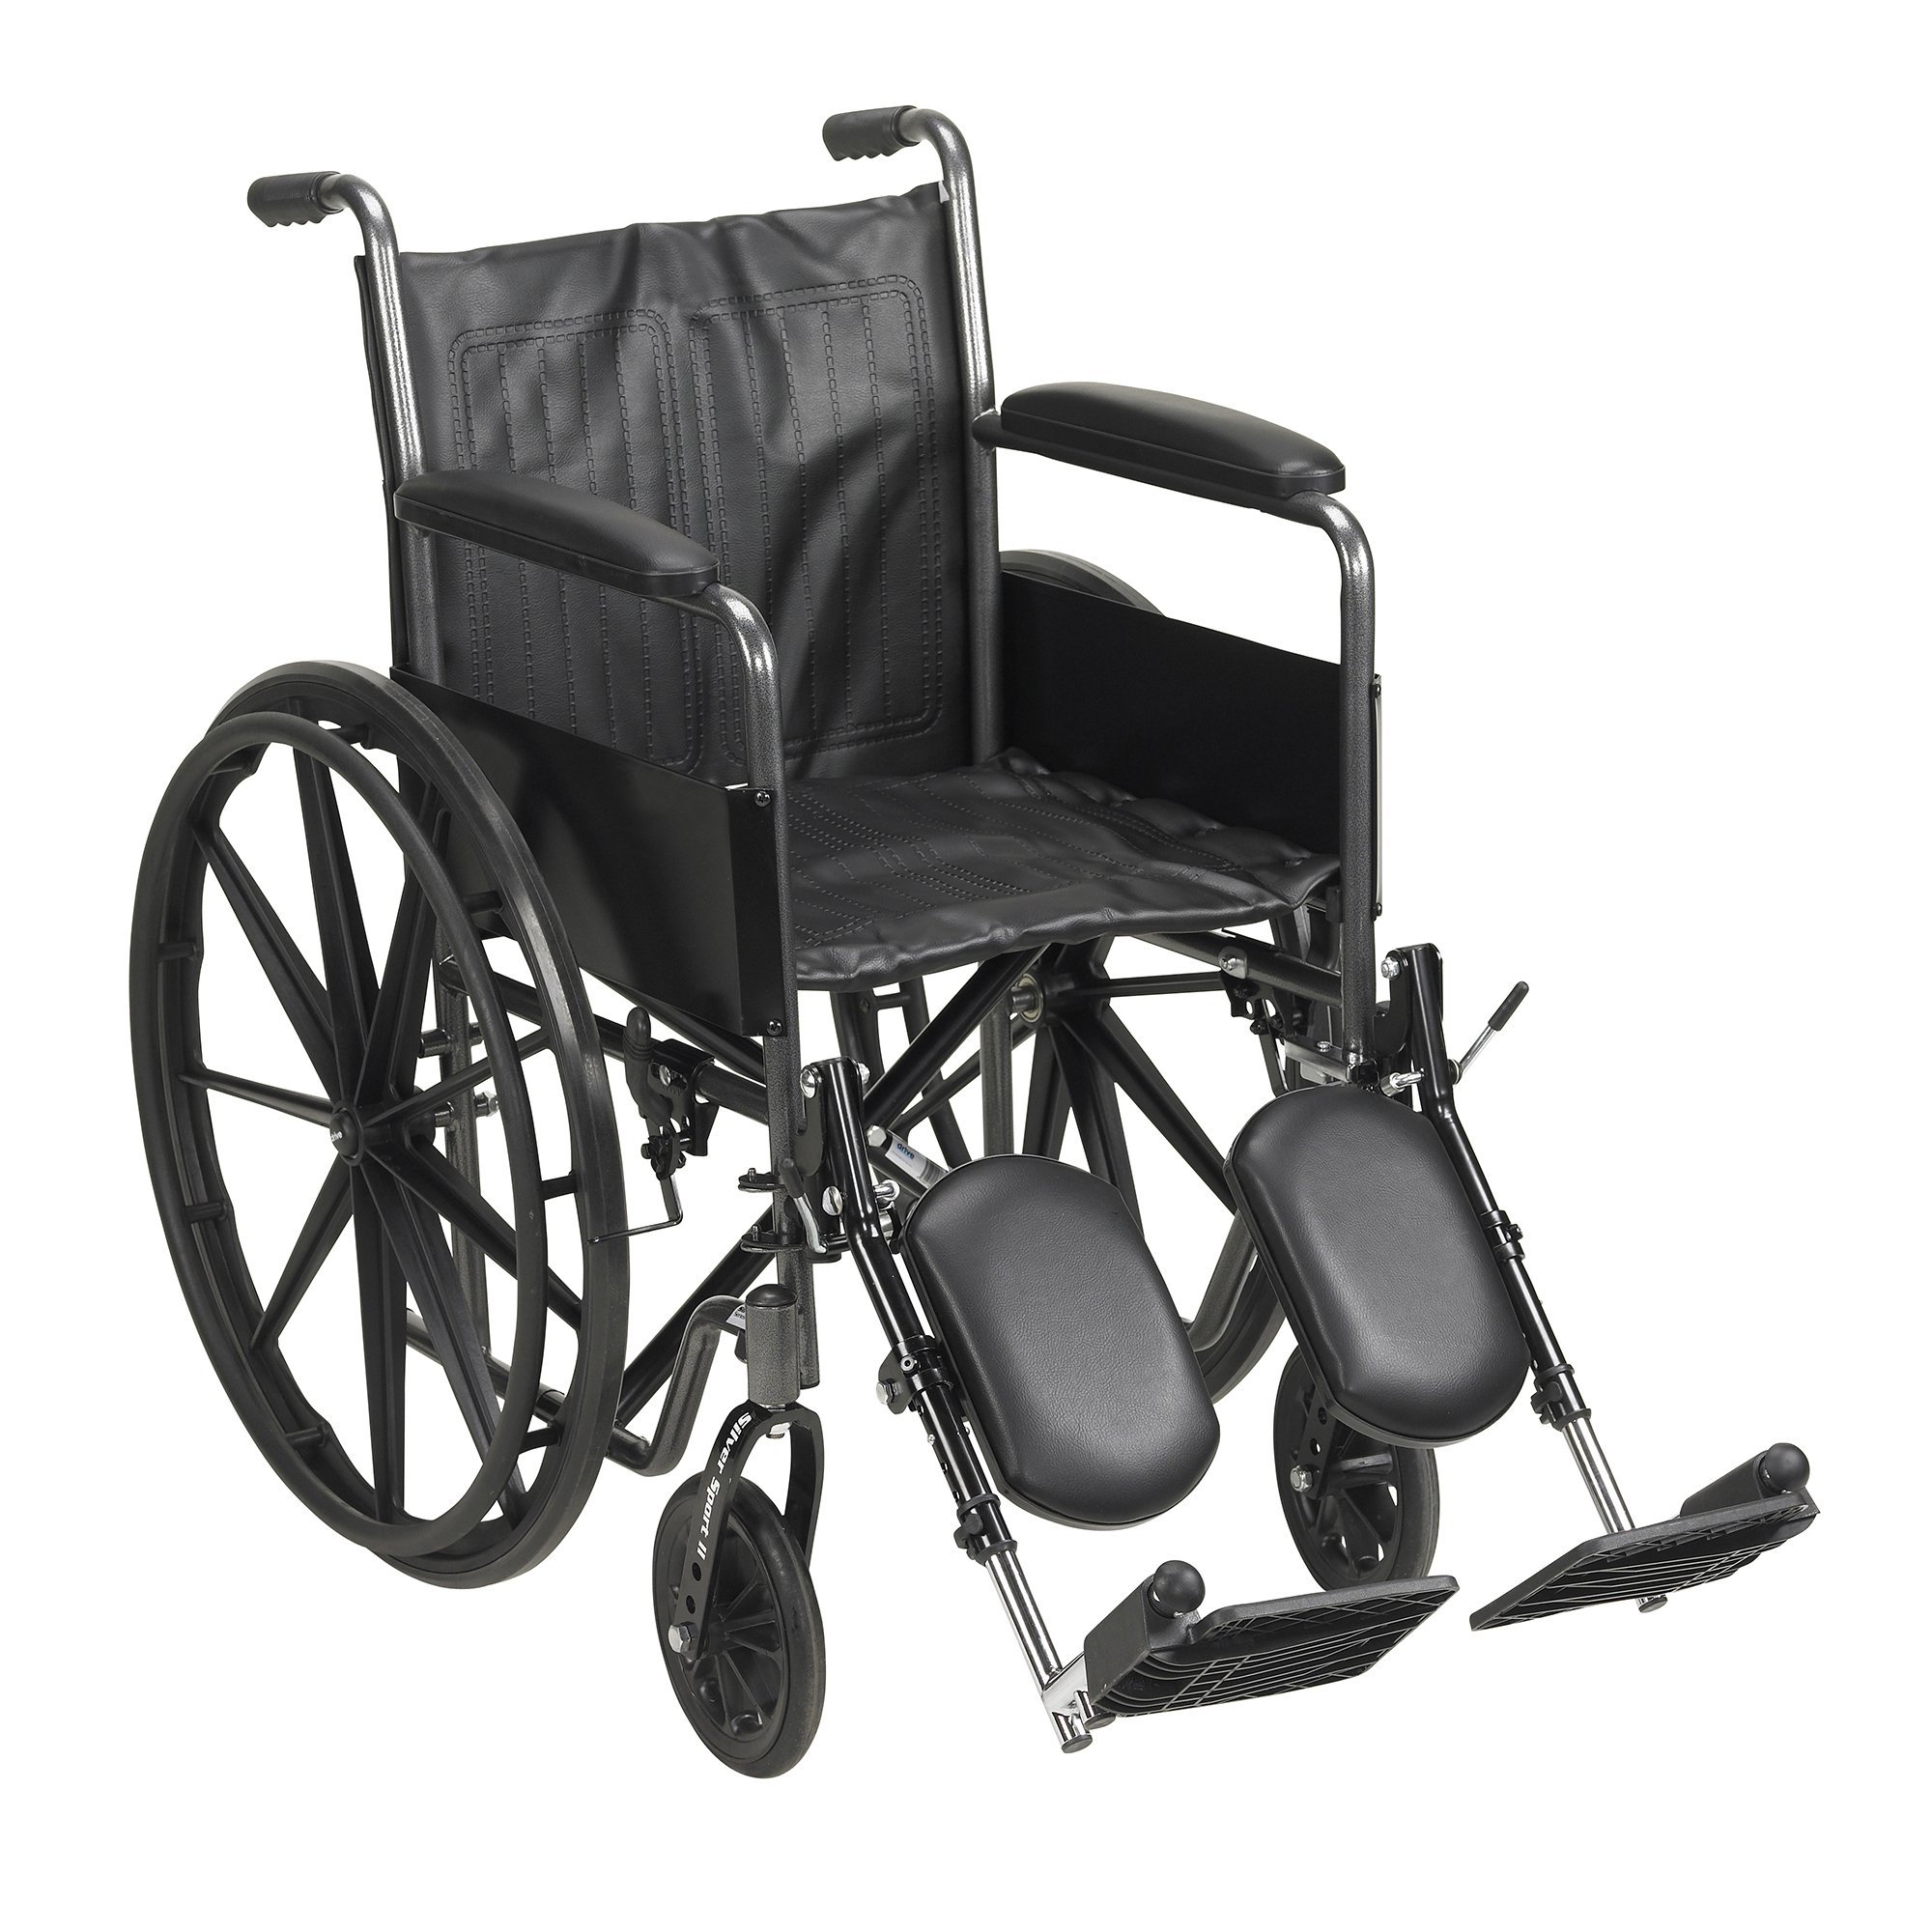 McKesson Standard Wheelchair with Padded, Removable Arm, Composite Mag Wheel, 18 in. Seat, Swing-Away Elevating Footrest, 300 lbs.